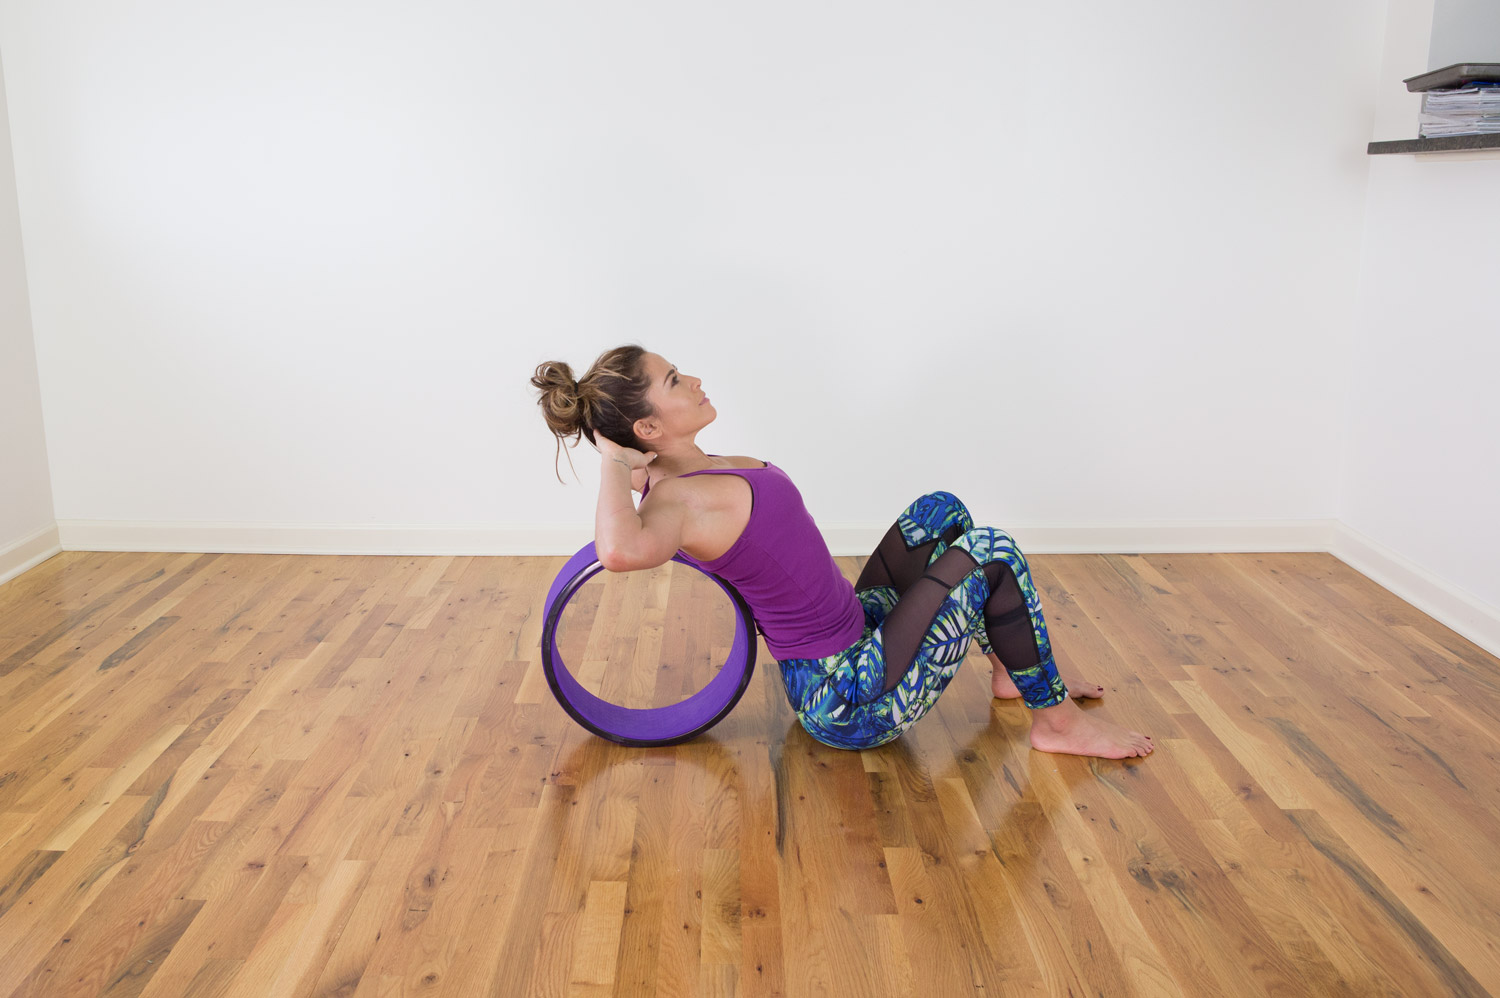 23 Minute Yoga Wheel Video for 